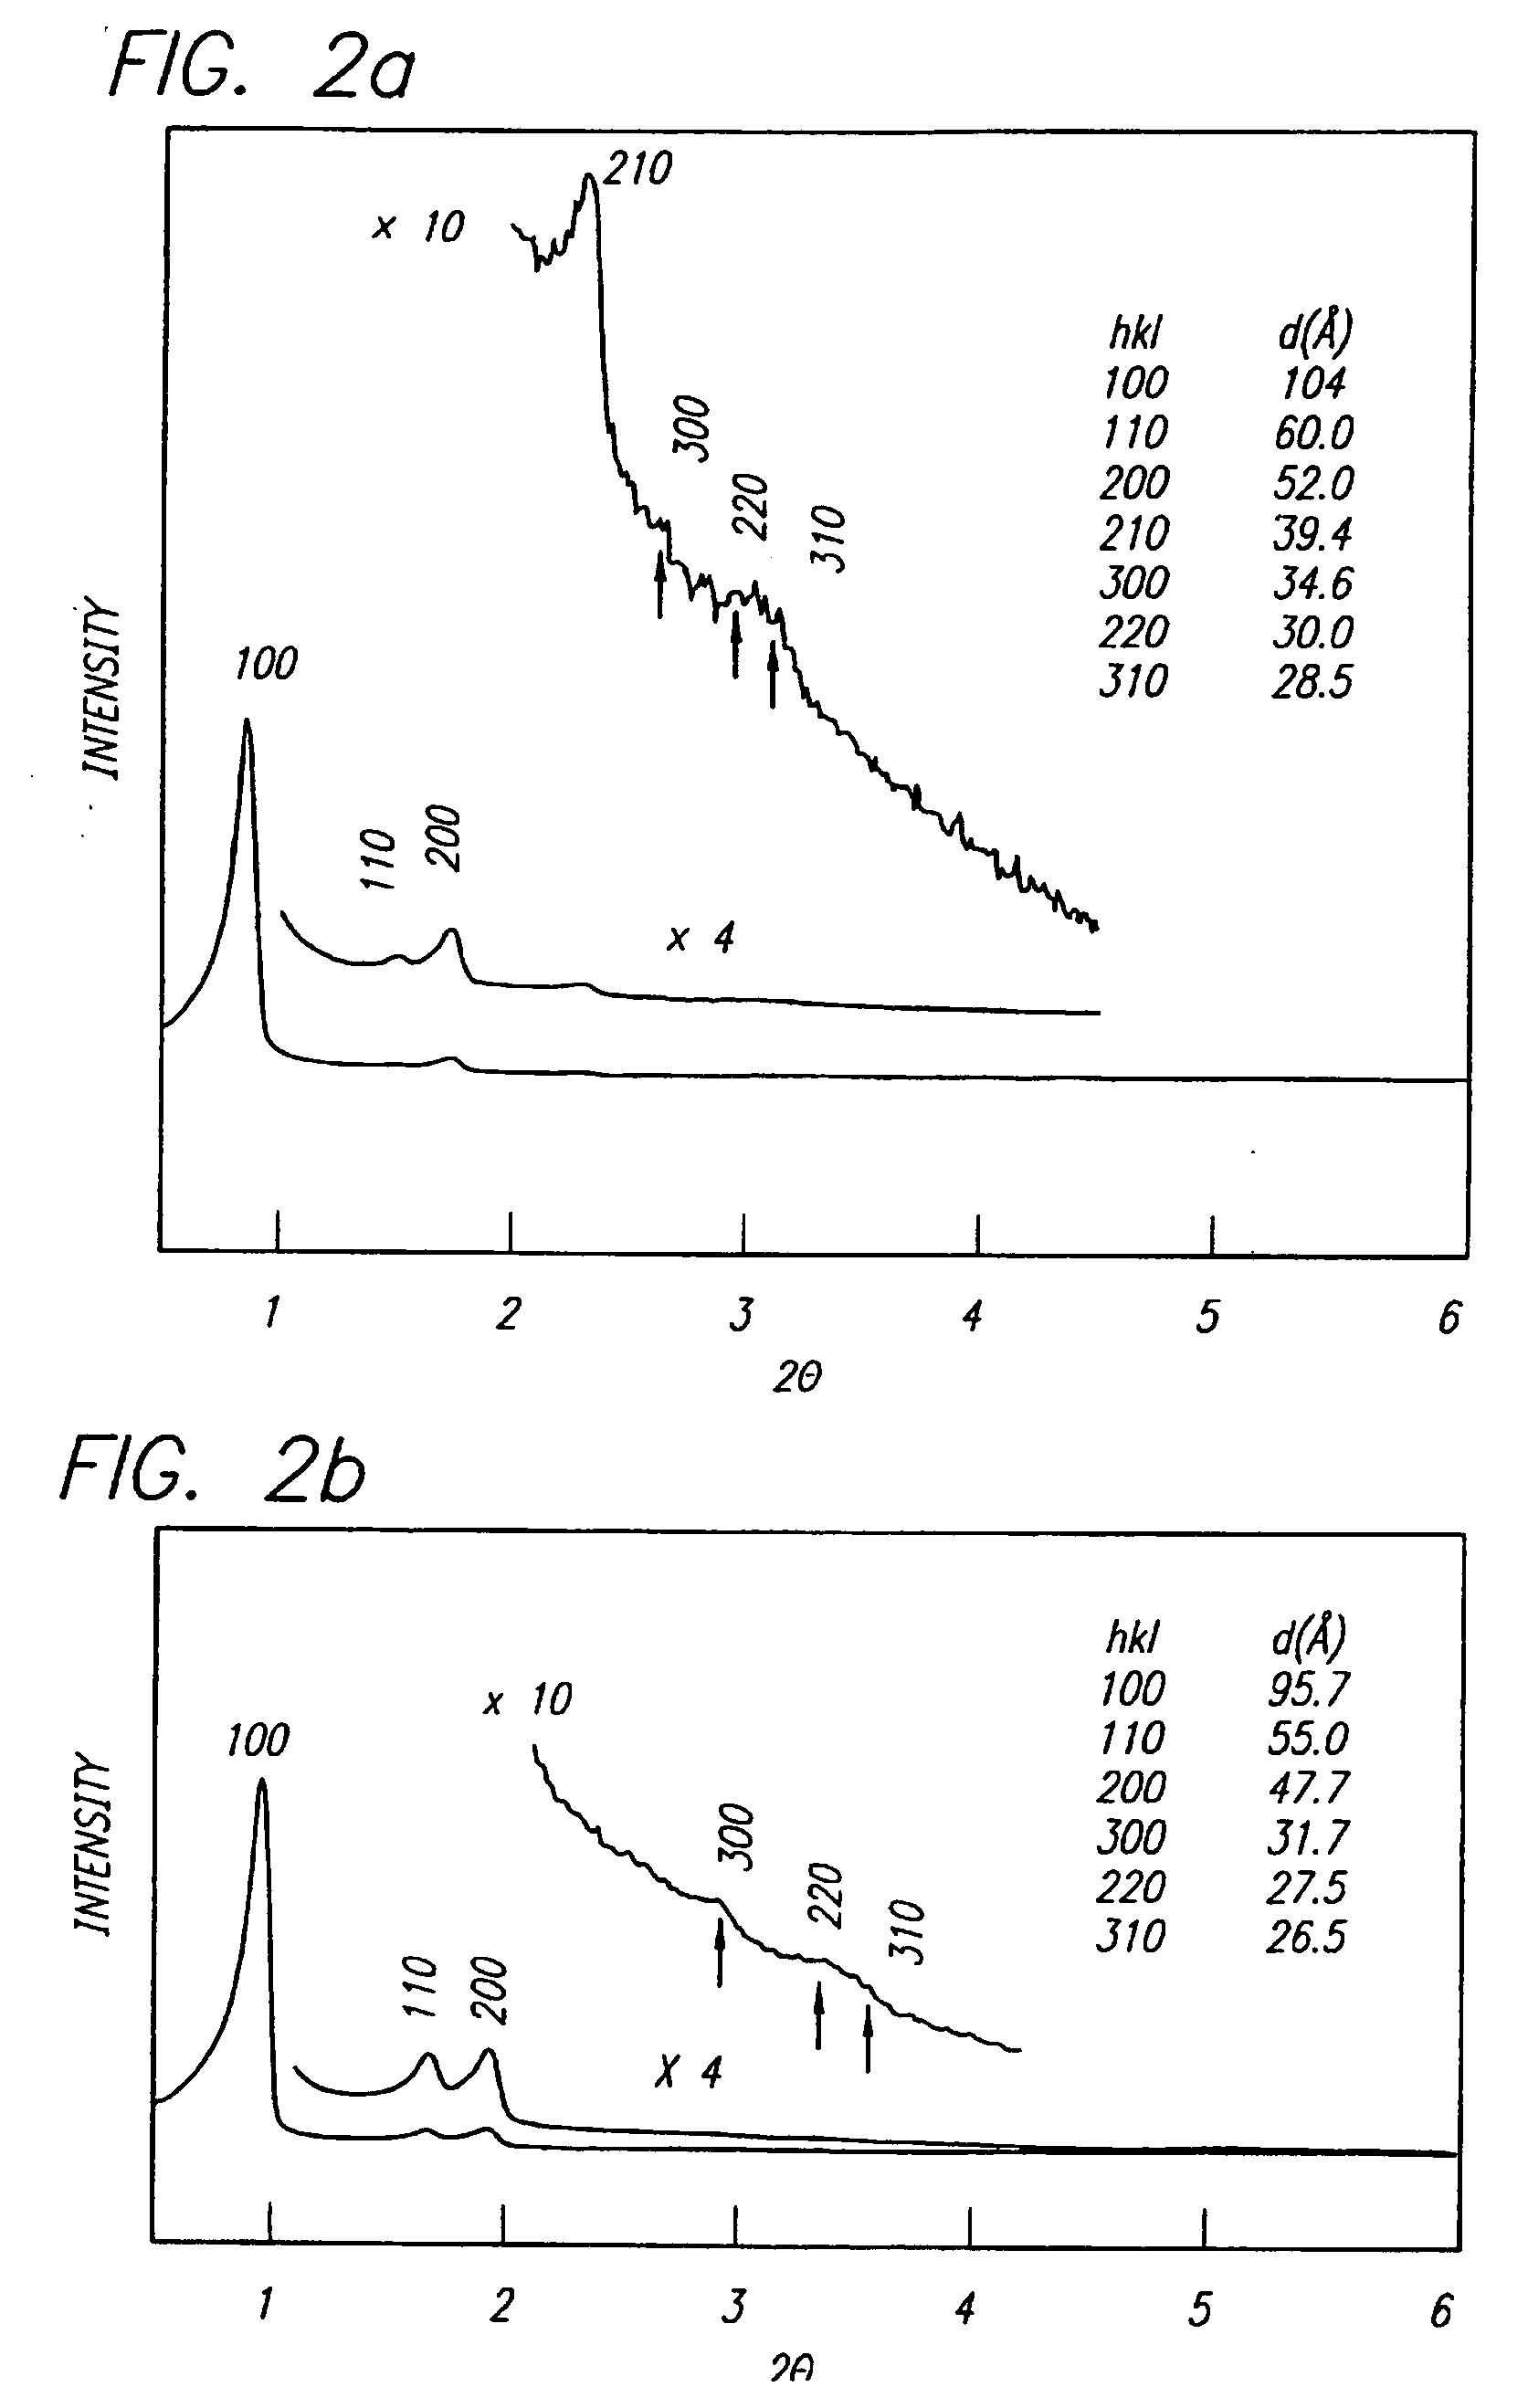 Block polymer processing for mesostructured inorganic oxide materials